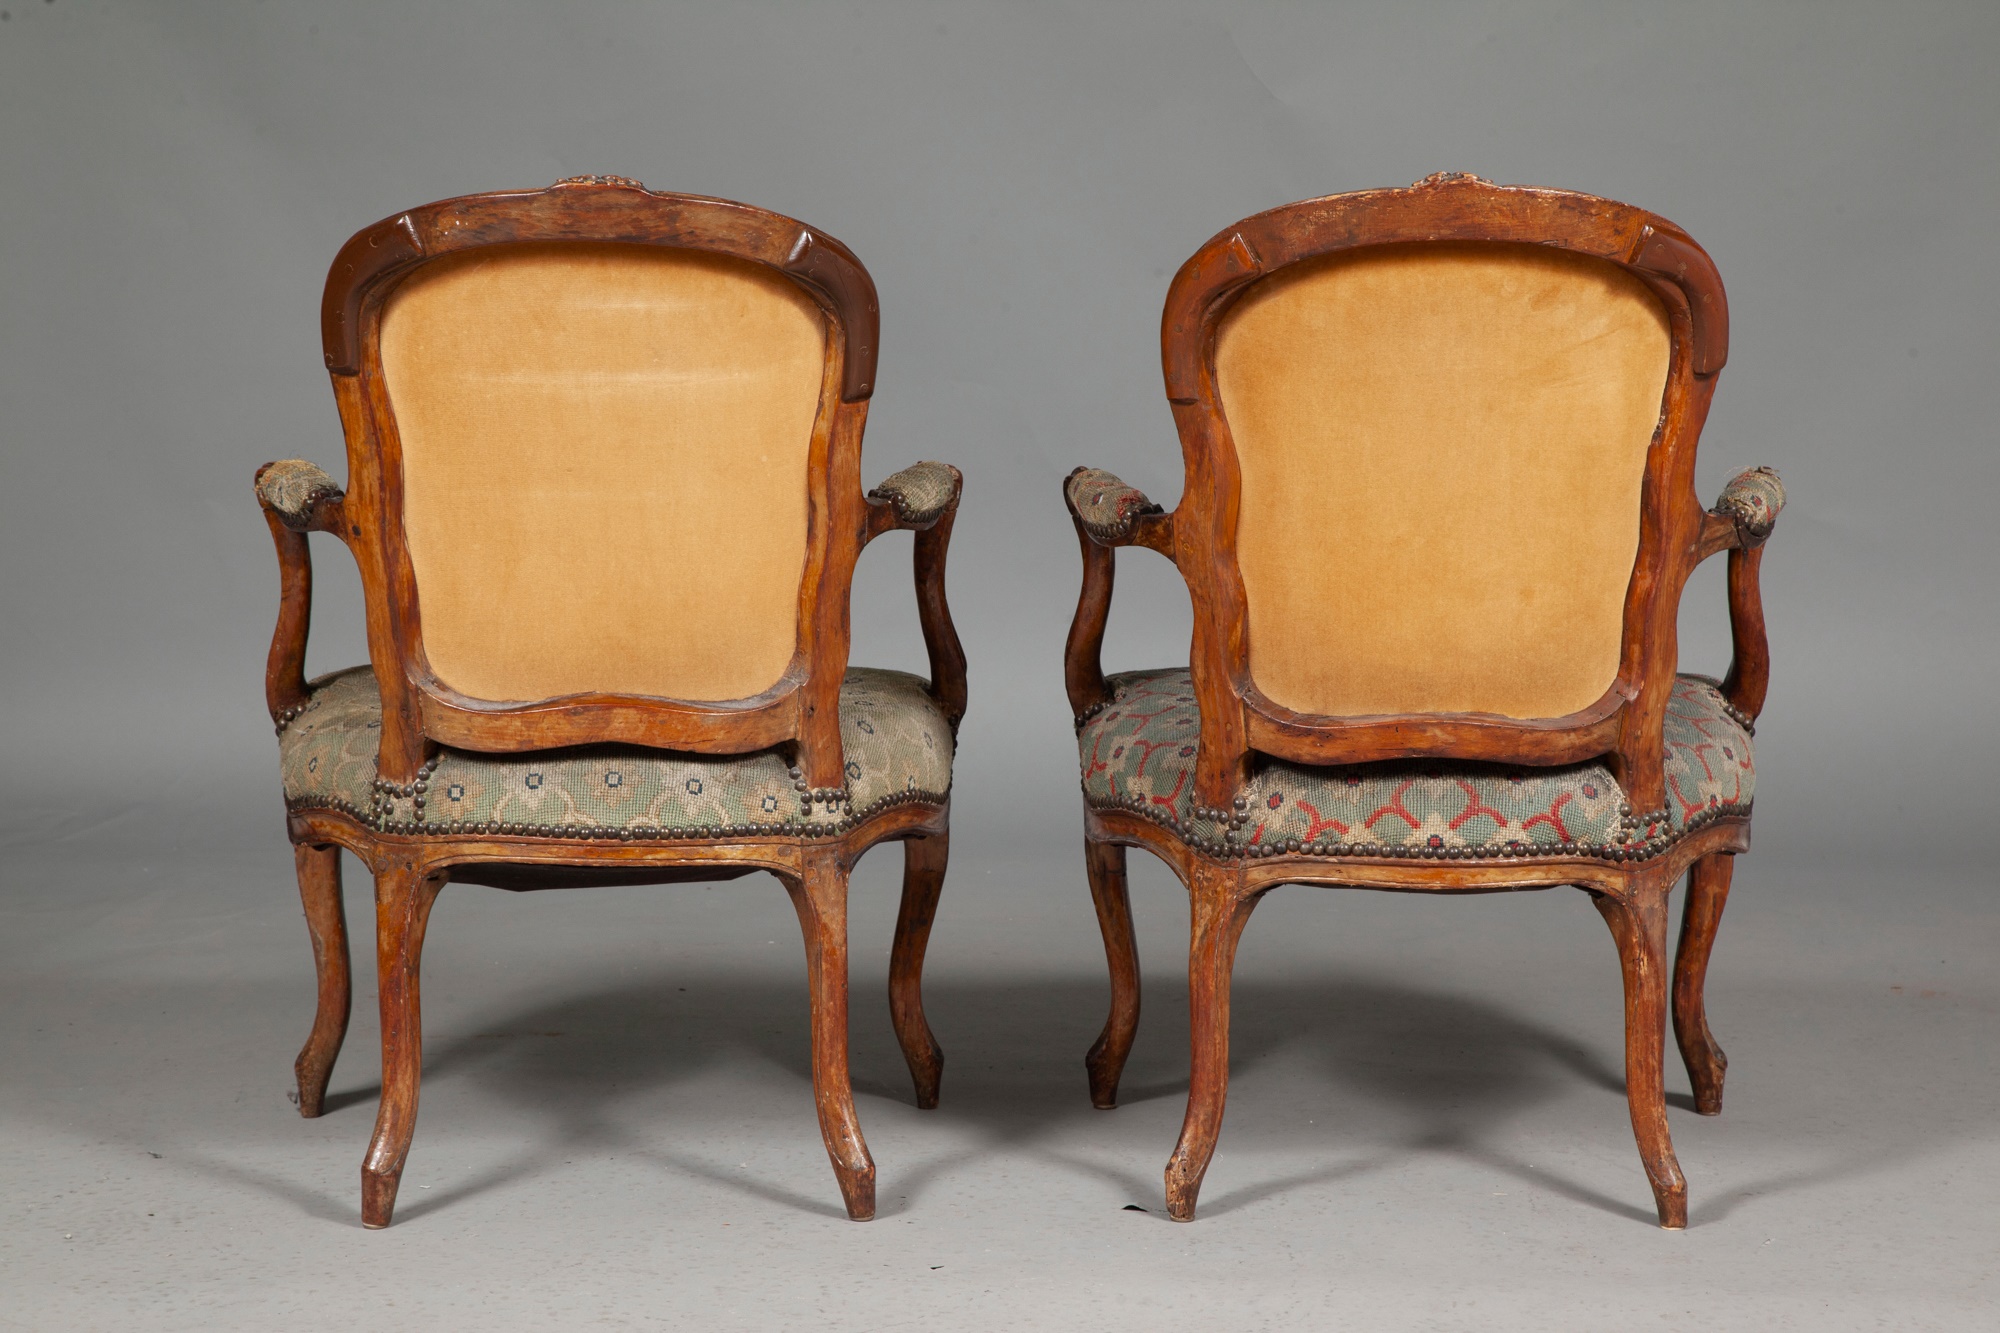 Assembled Group of Louis XV Needlework-Upholstered Beechwood Fauteuils - Image 4 of 8